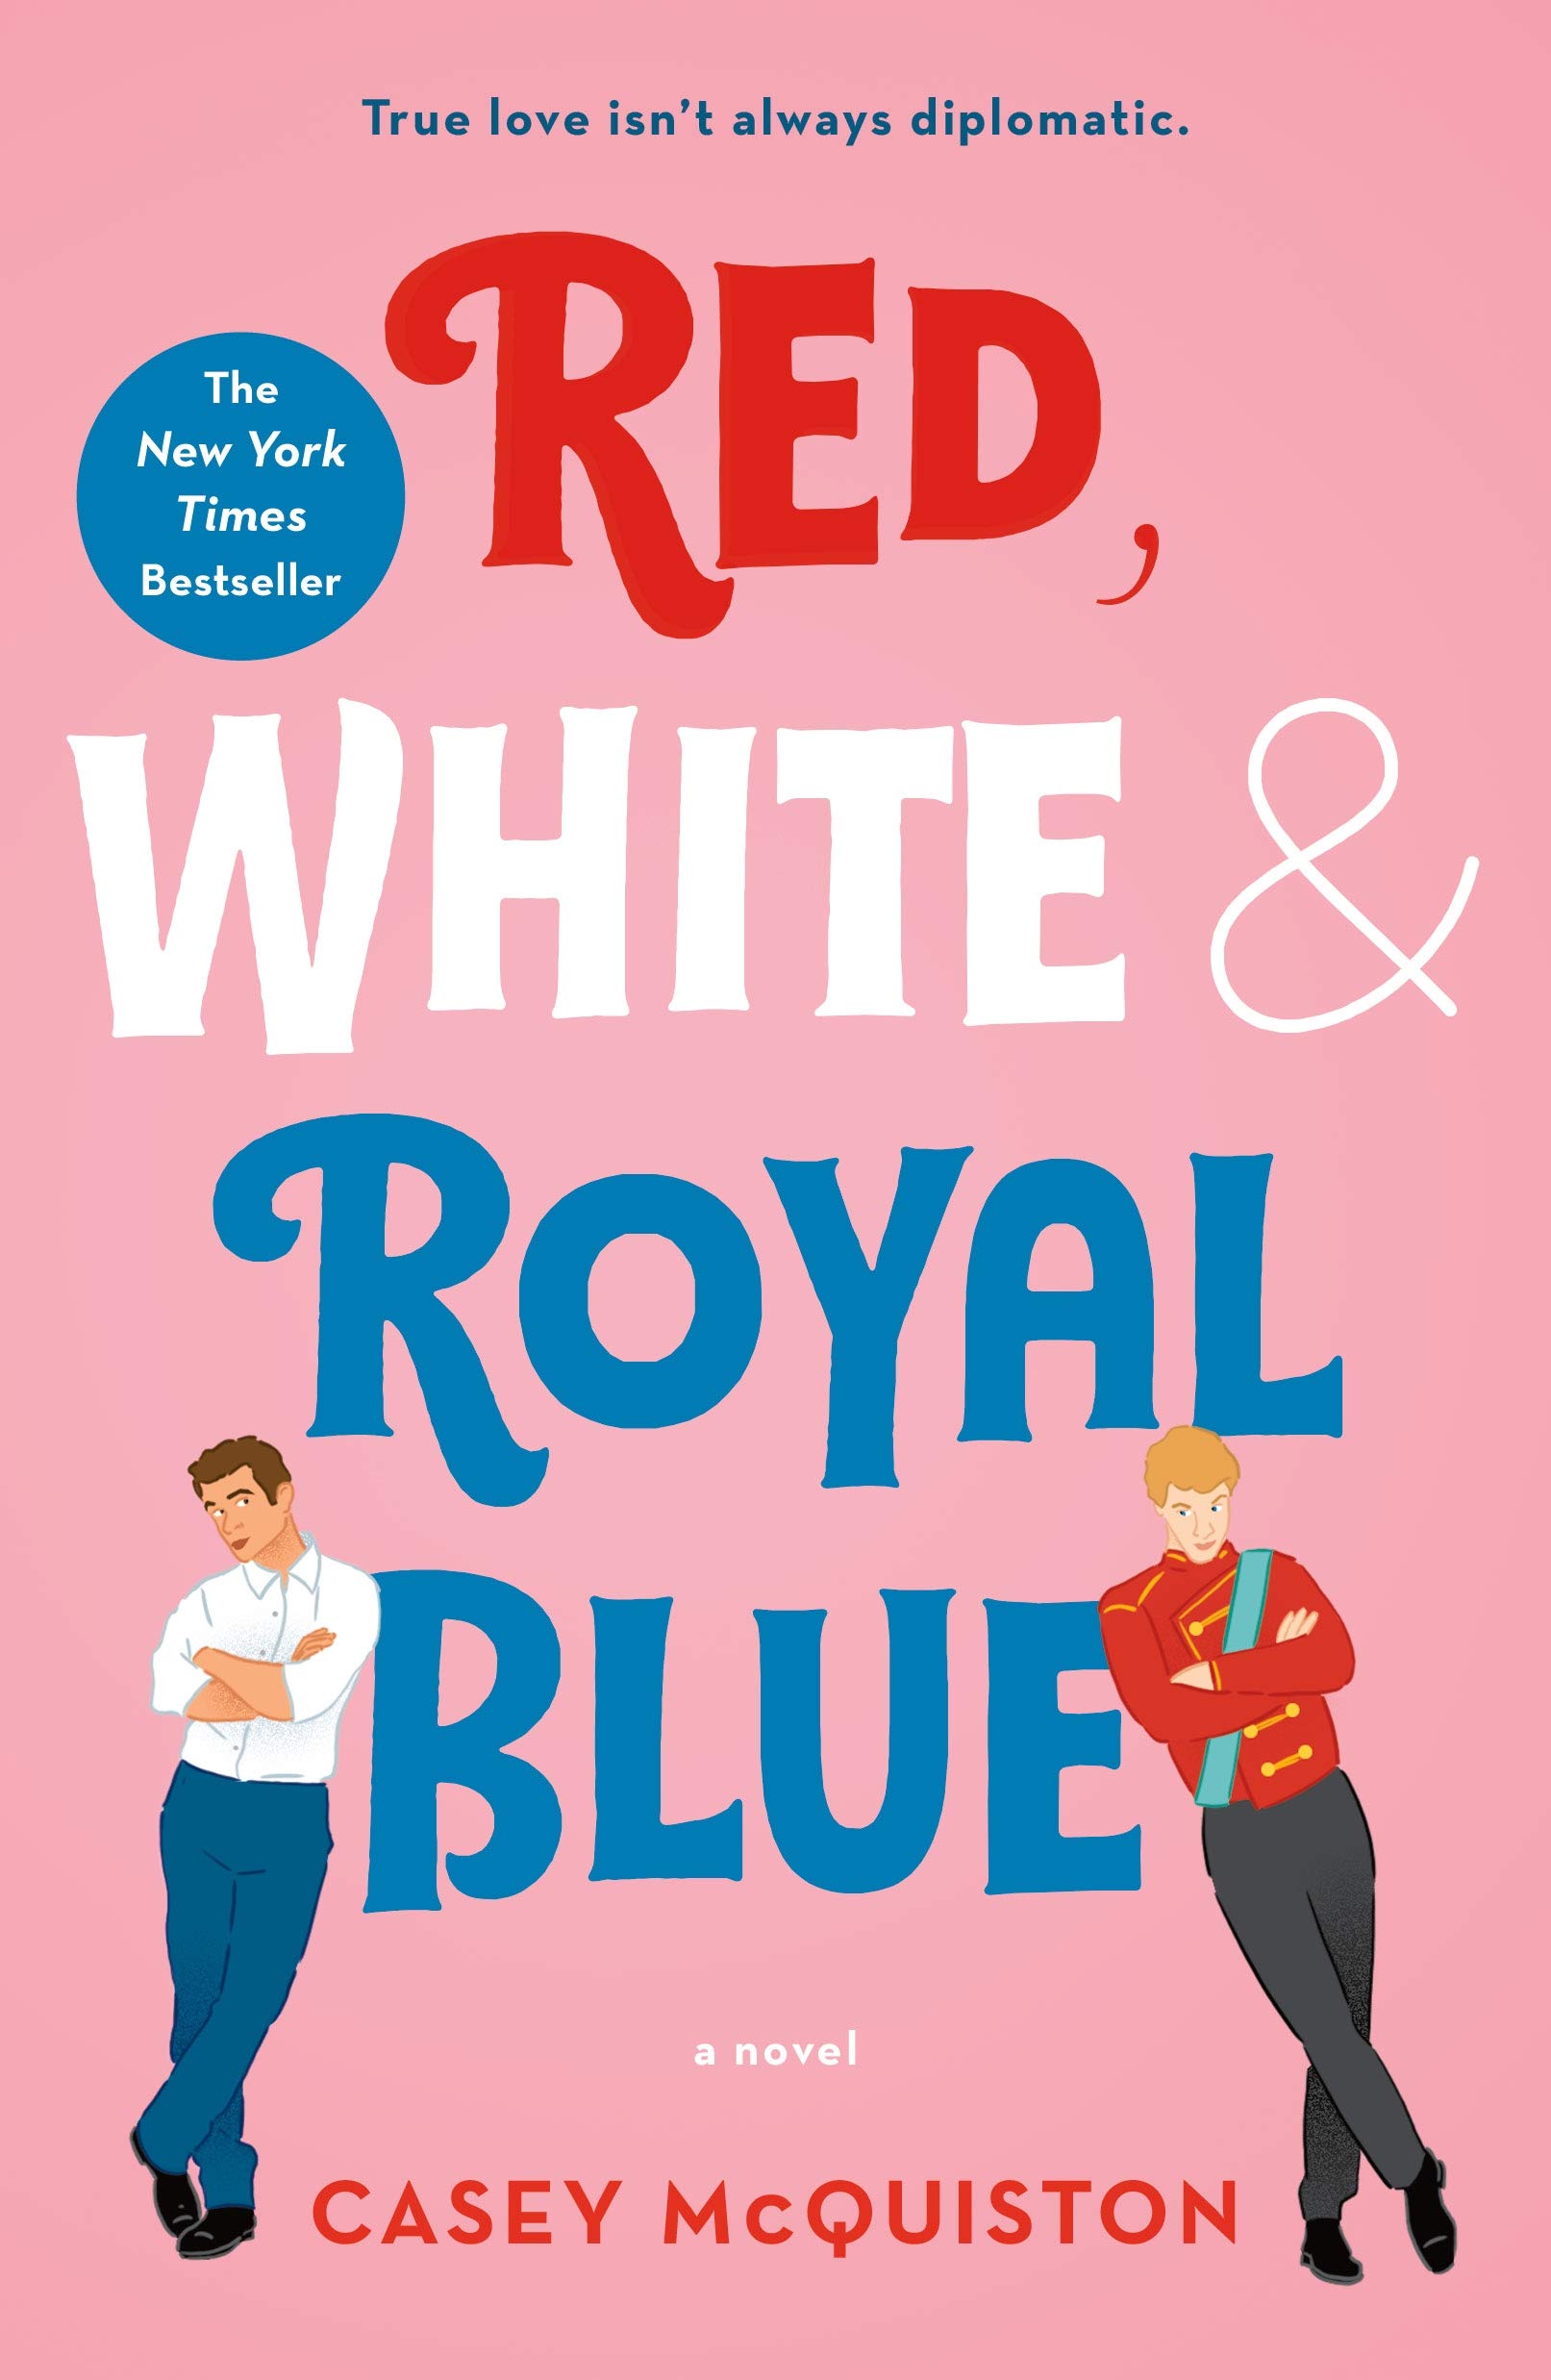 Red, White & Royal Blue by Casey McQuiston, favorite weekly book find